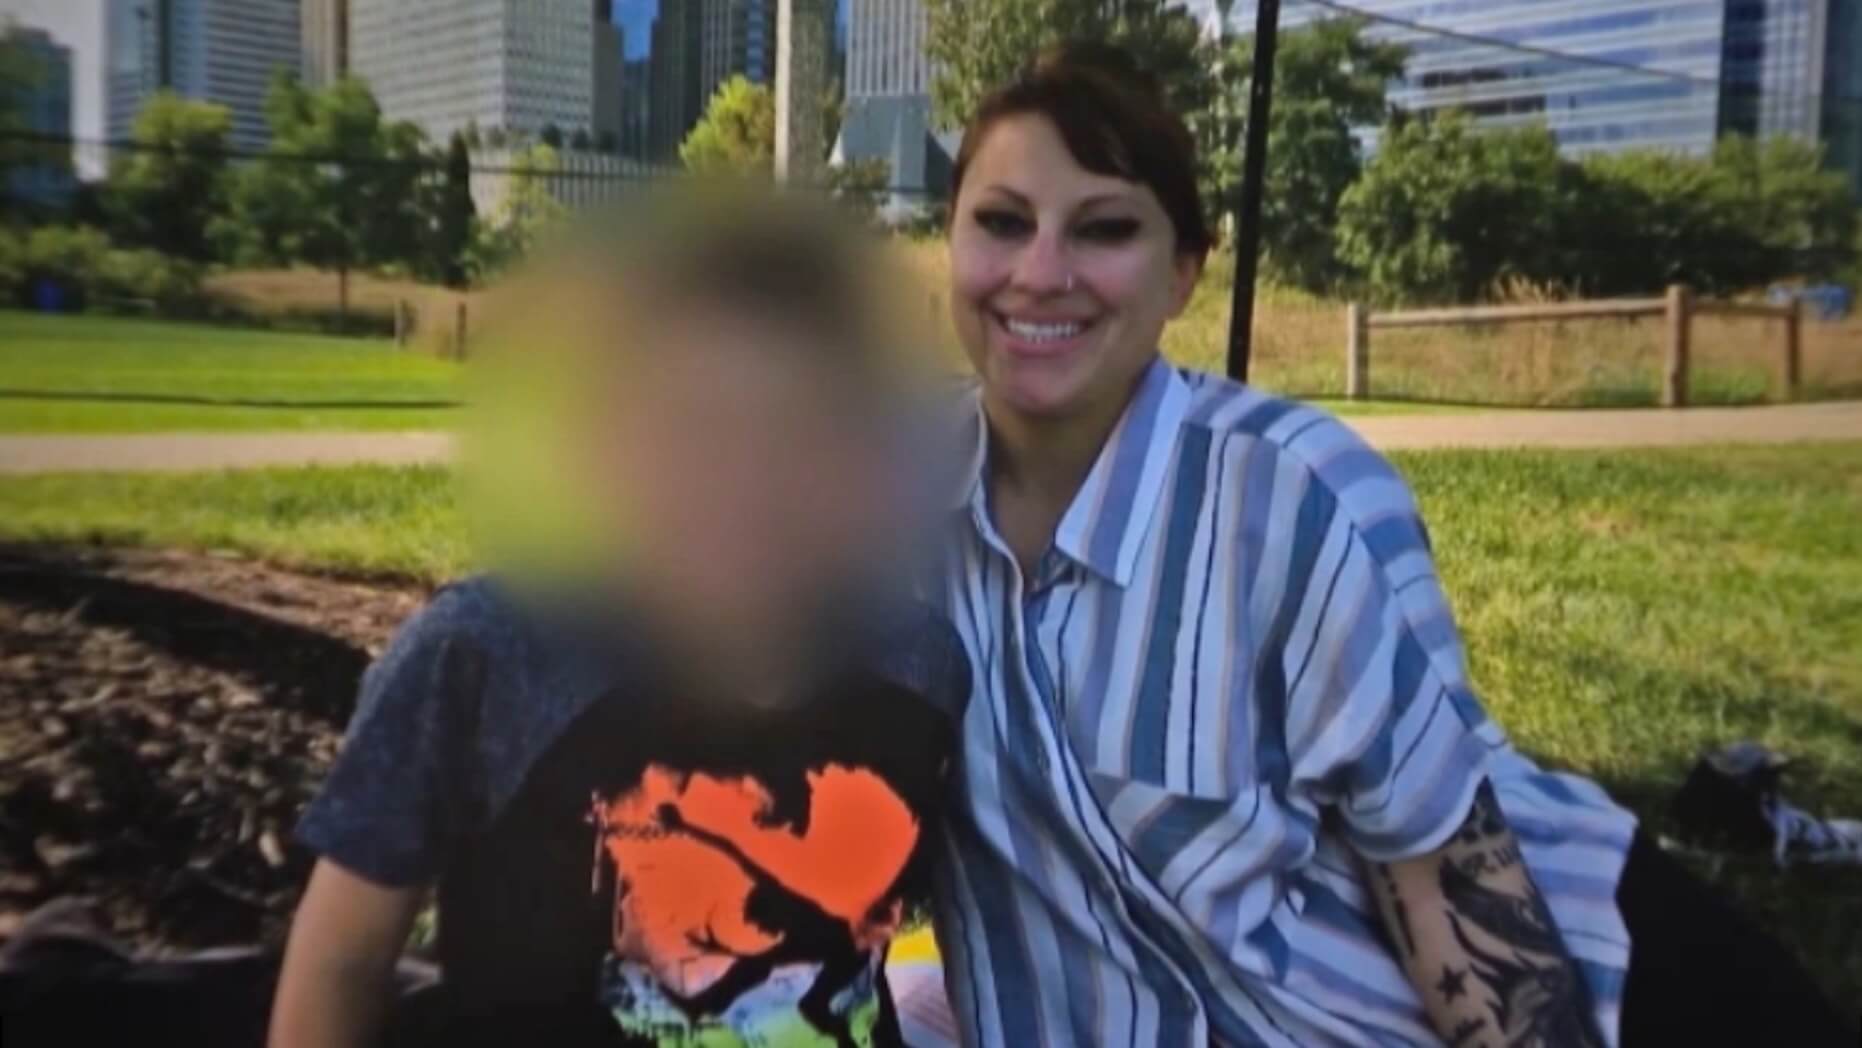 Rebecca Firlit and her son (Credit: FOX 32 Chicago) (FOX 32 Chicago)